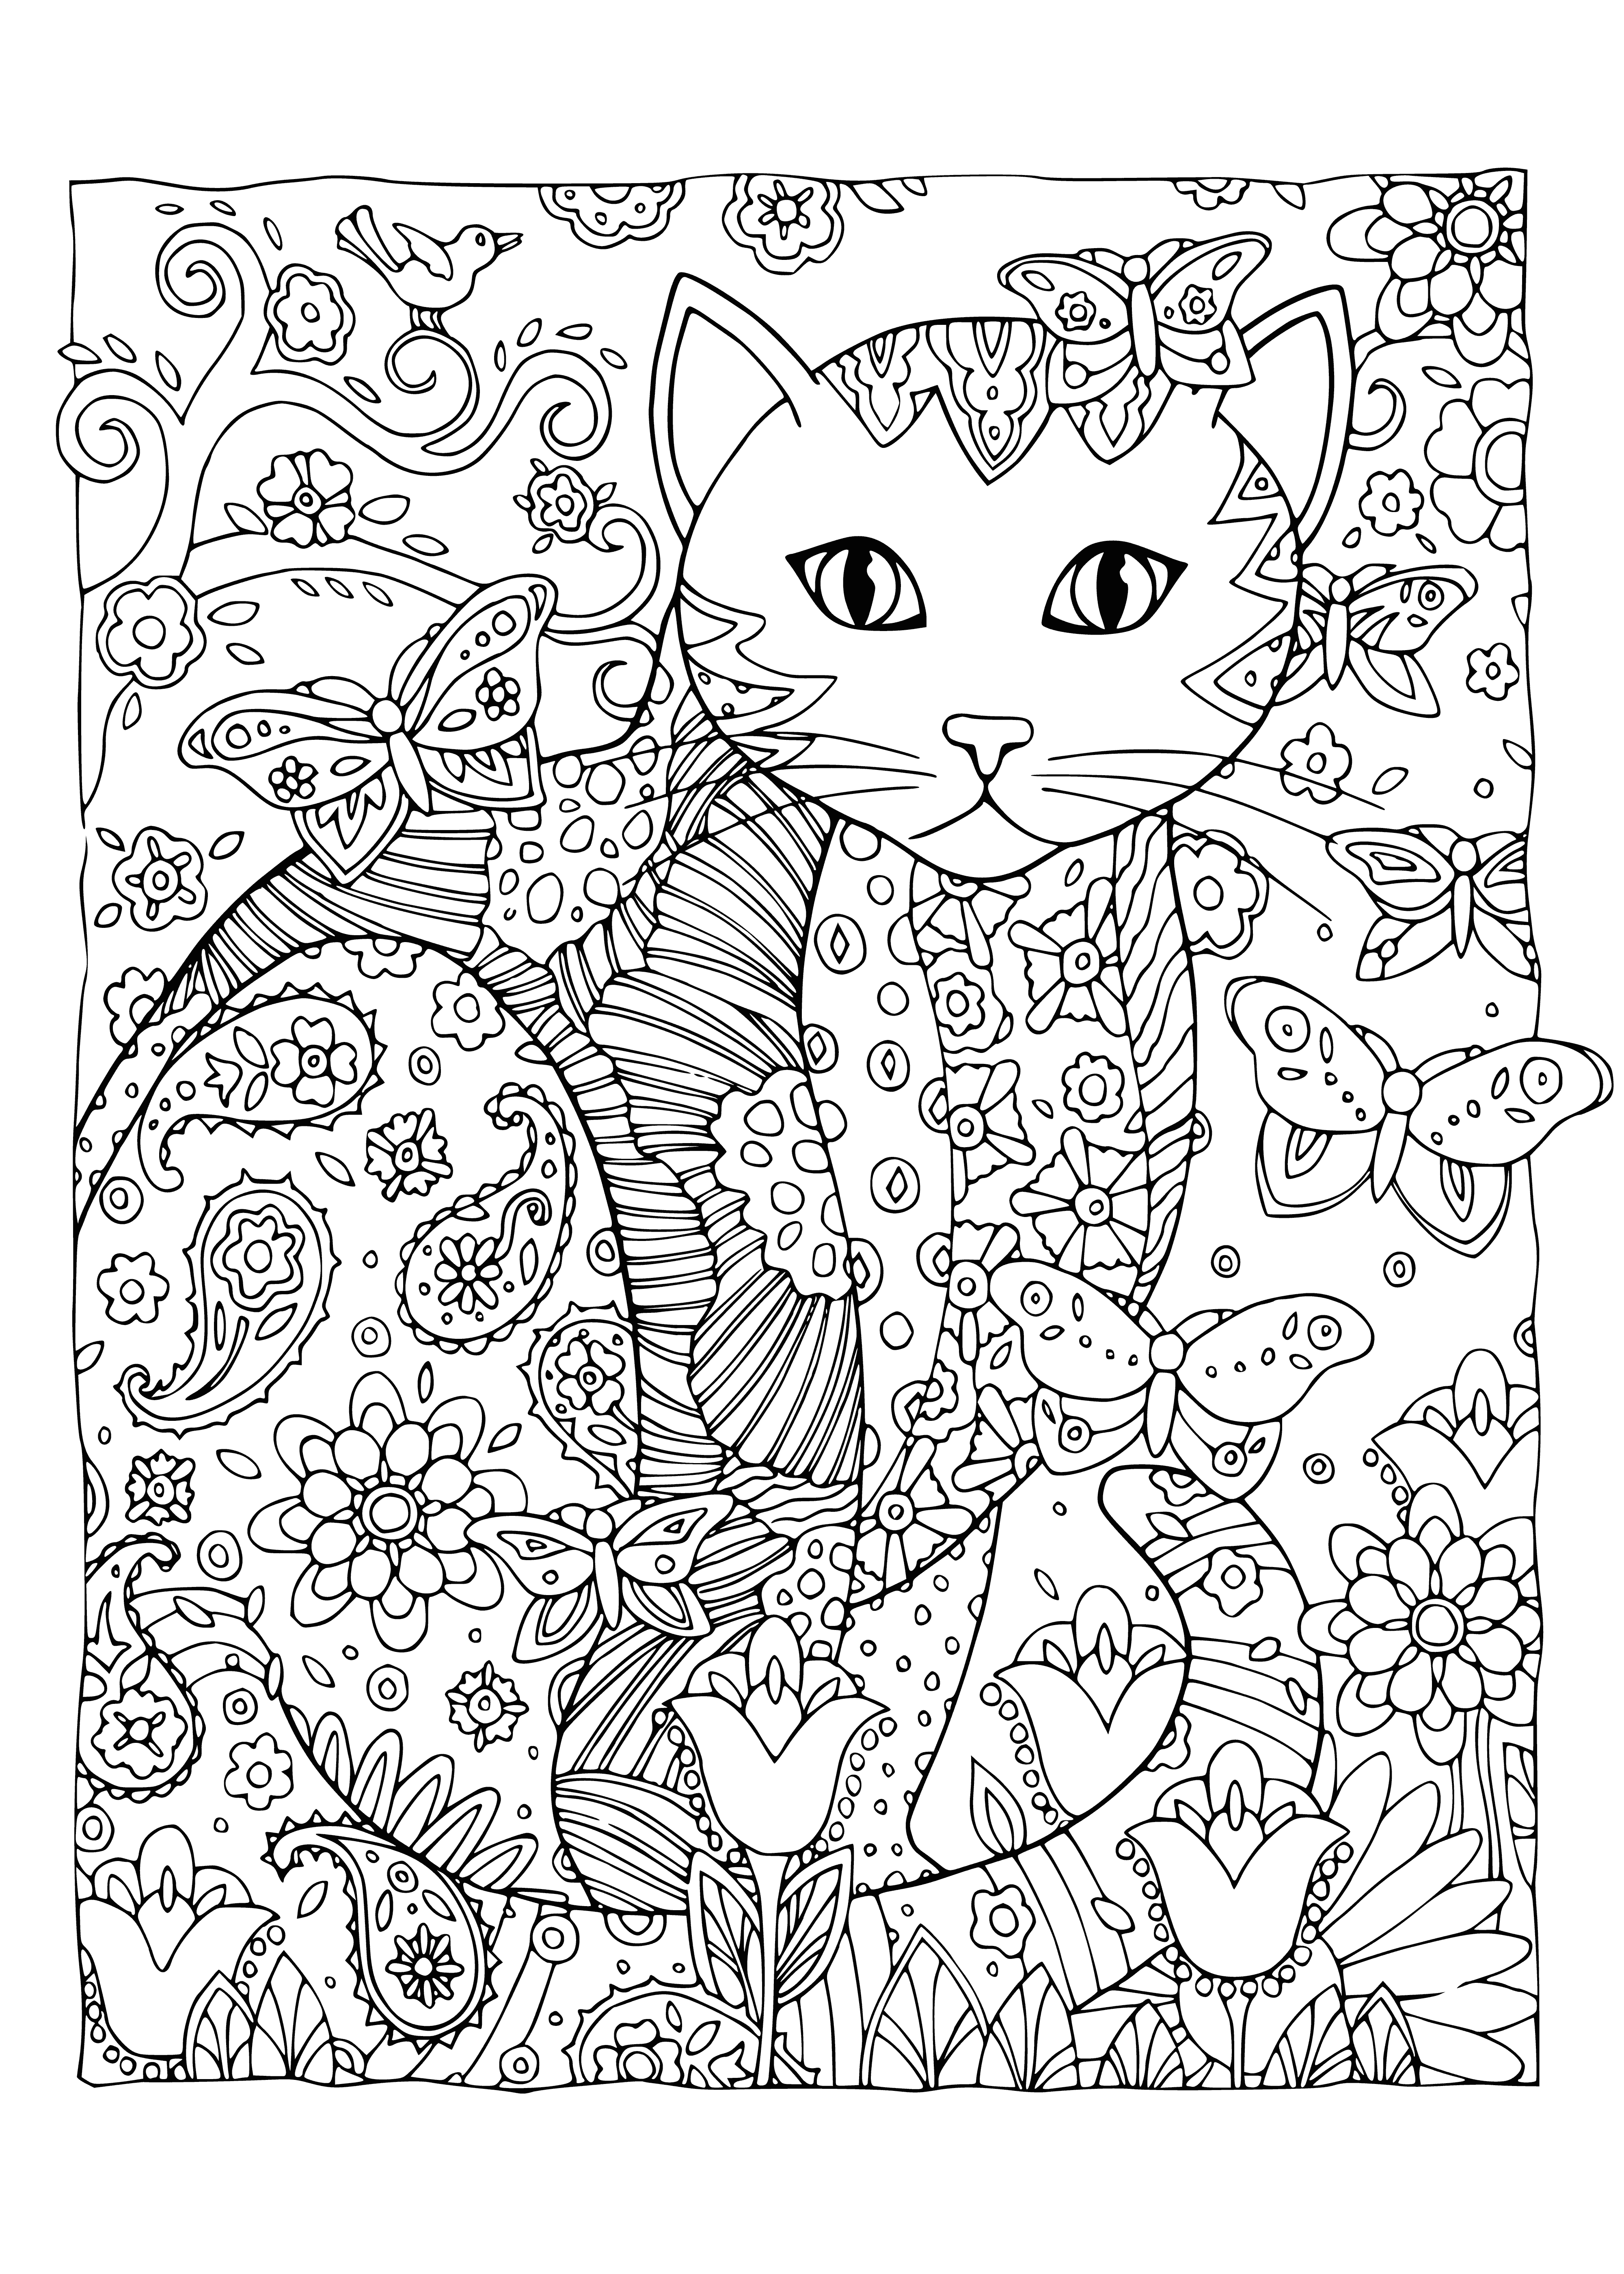 coloring page: A cat is relaxing amongst a field of flowers, with butterflies fluttering around. Perfect coloring page for relaxation w/ muted & calming colors.